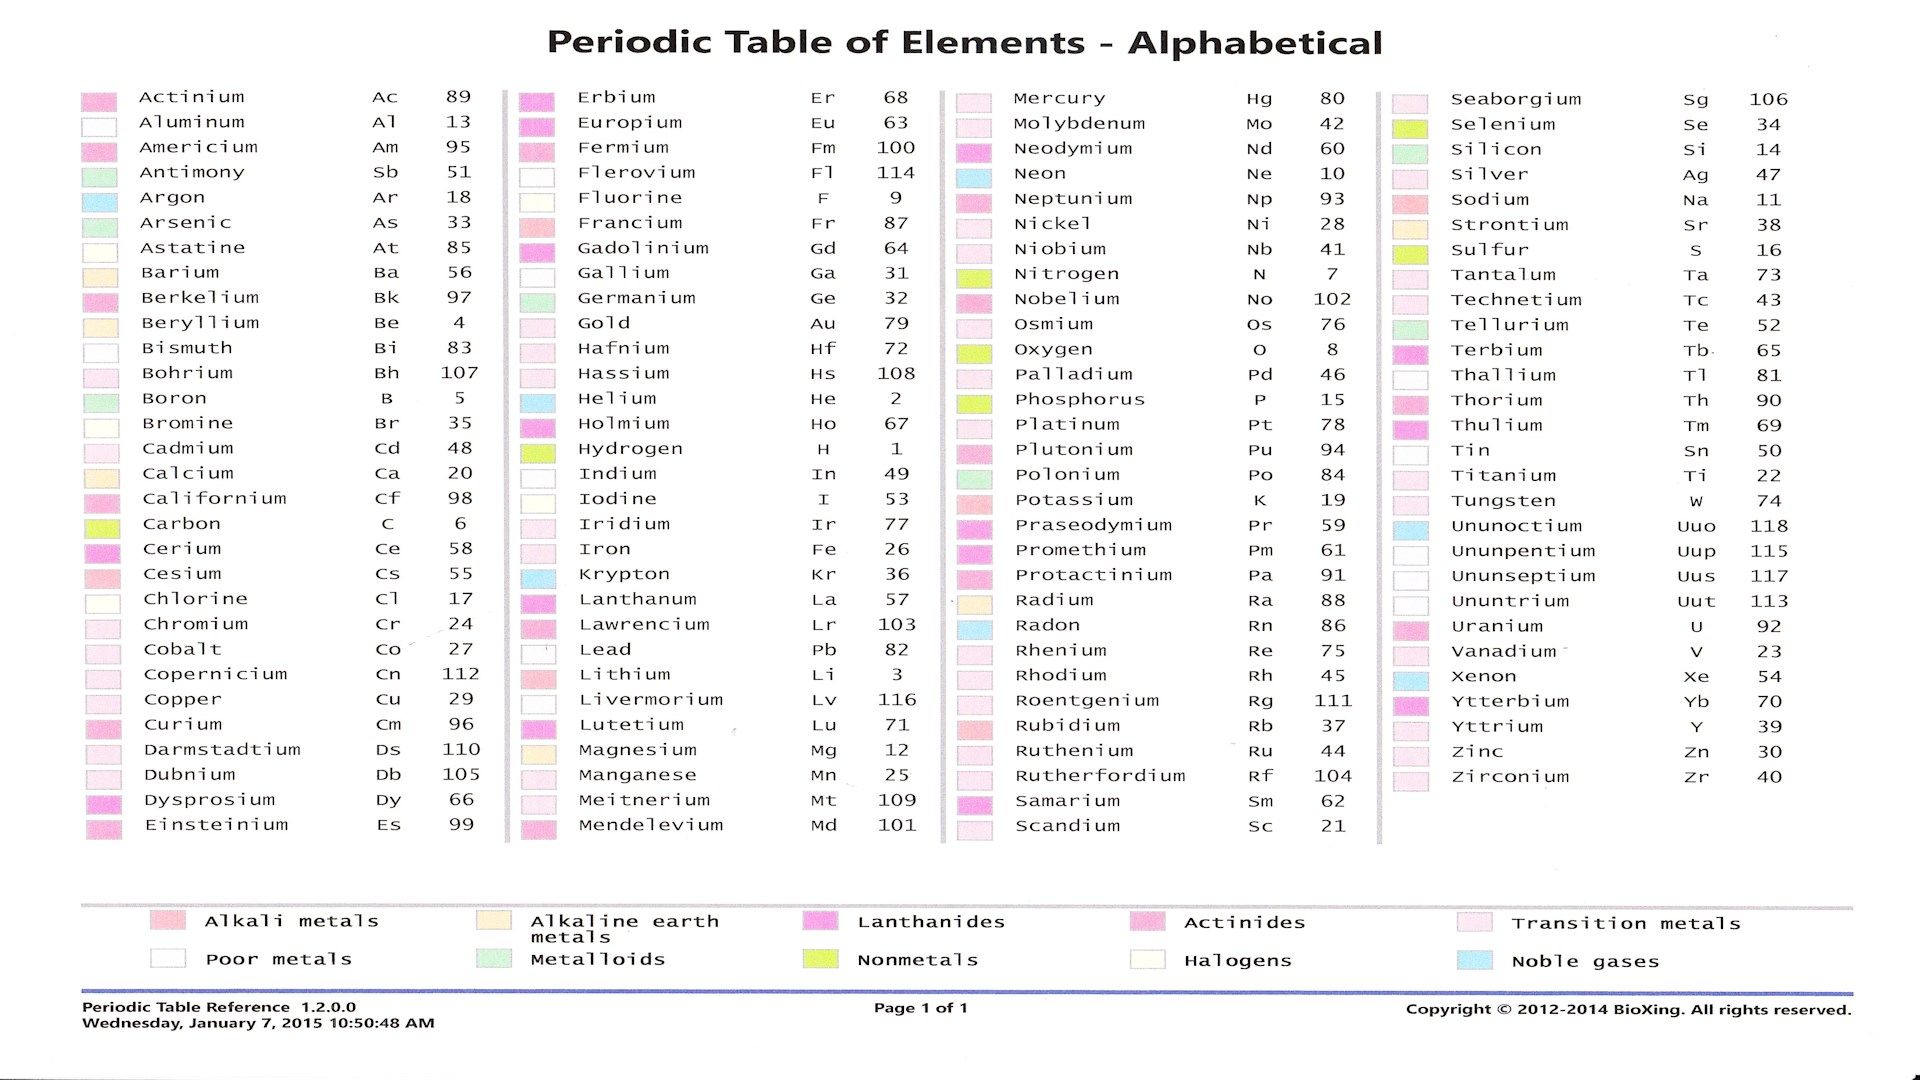 List of elements by Atomic Number.